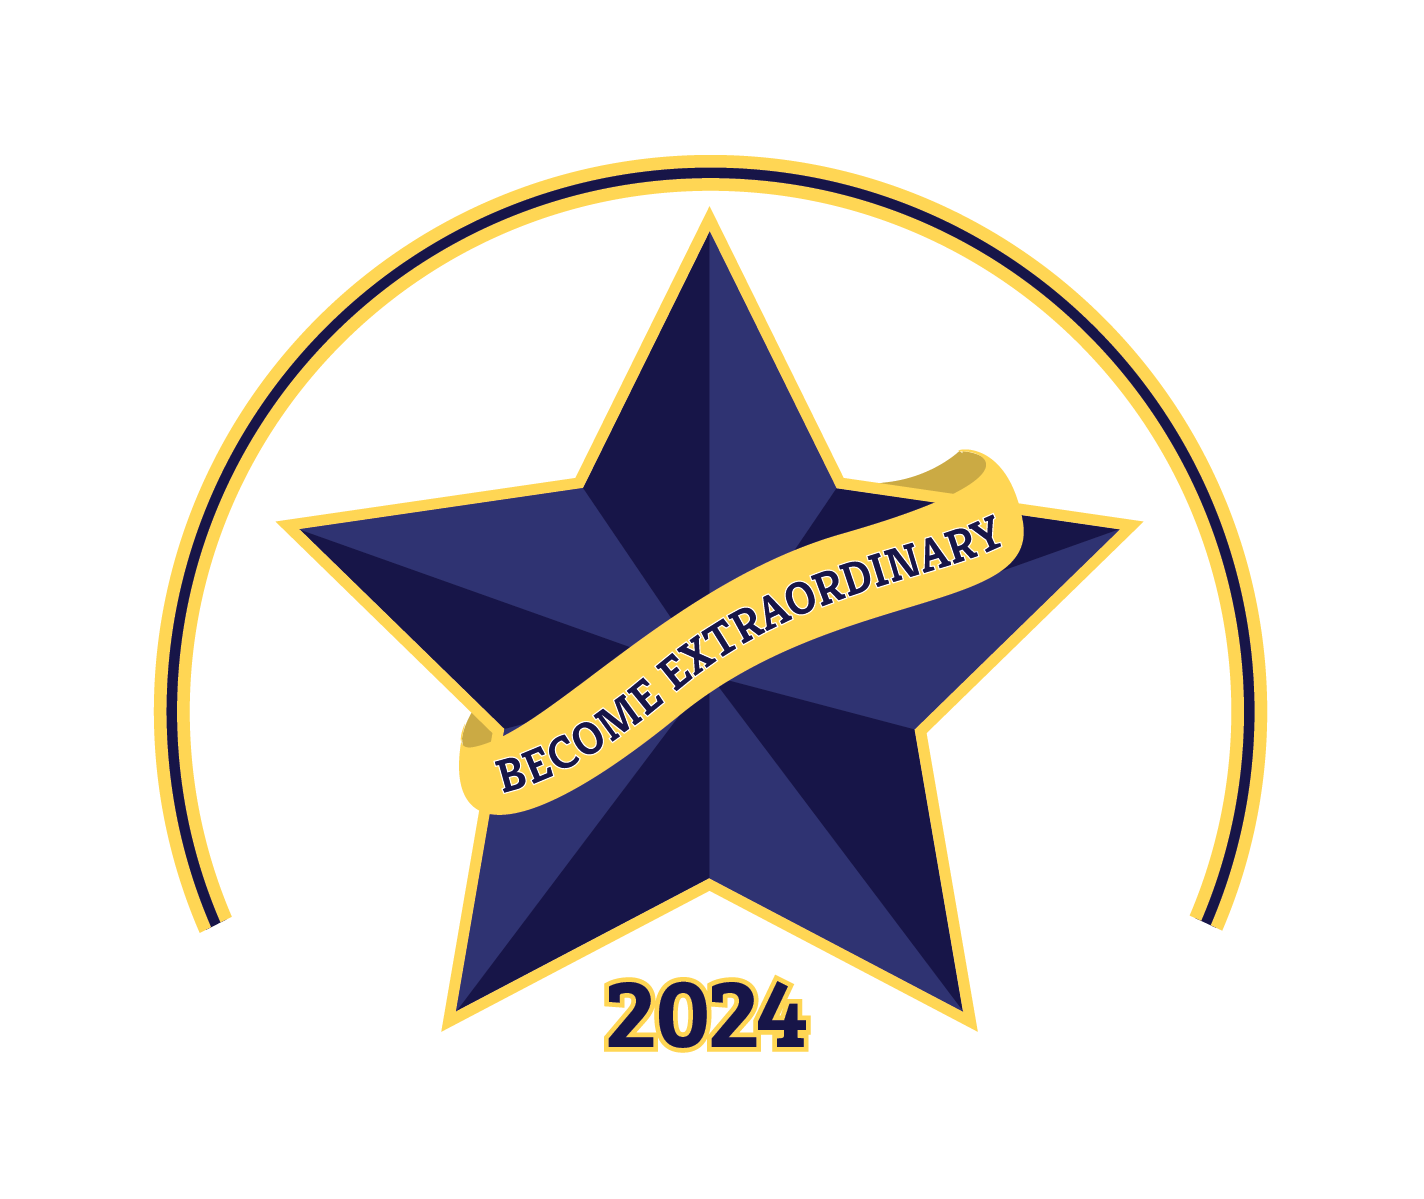 List of Home Inspection Tools and Inspector Safety Equipment - InterNACHI®